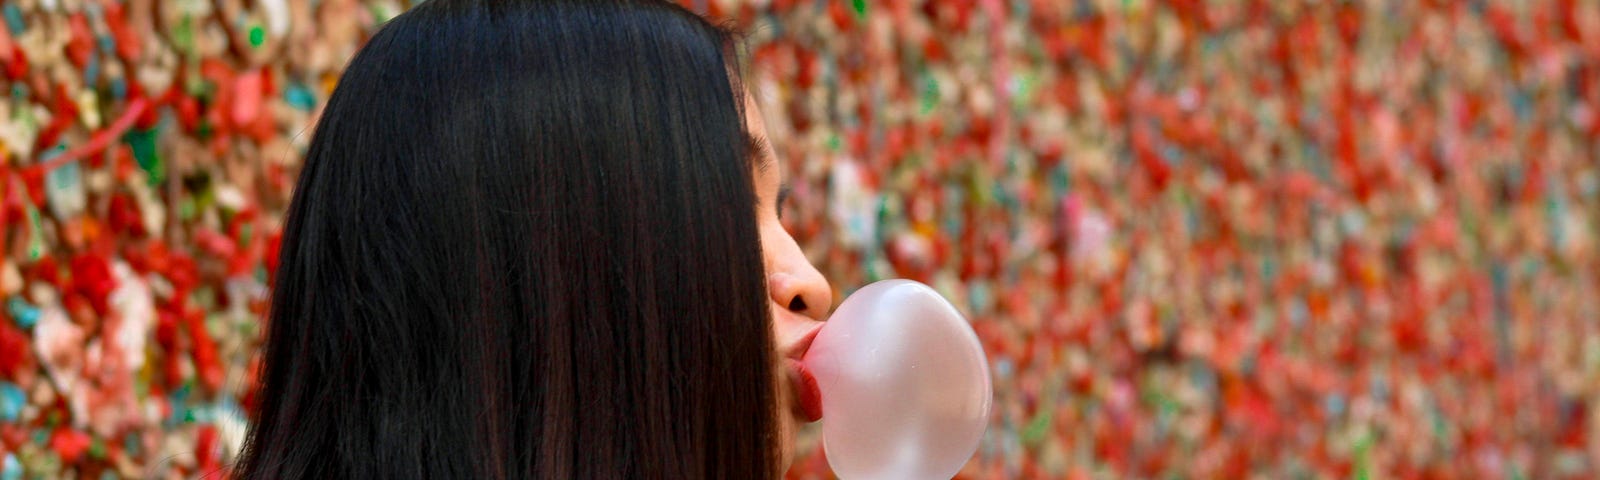 Profile of a young woman blowing a large pink bubble from chewing gum. The Seattle’ Pike Place Market gum wall is in the background.